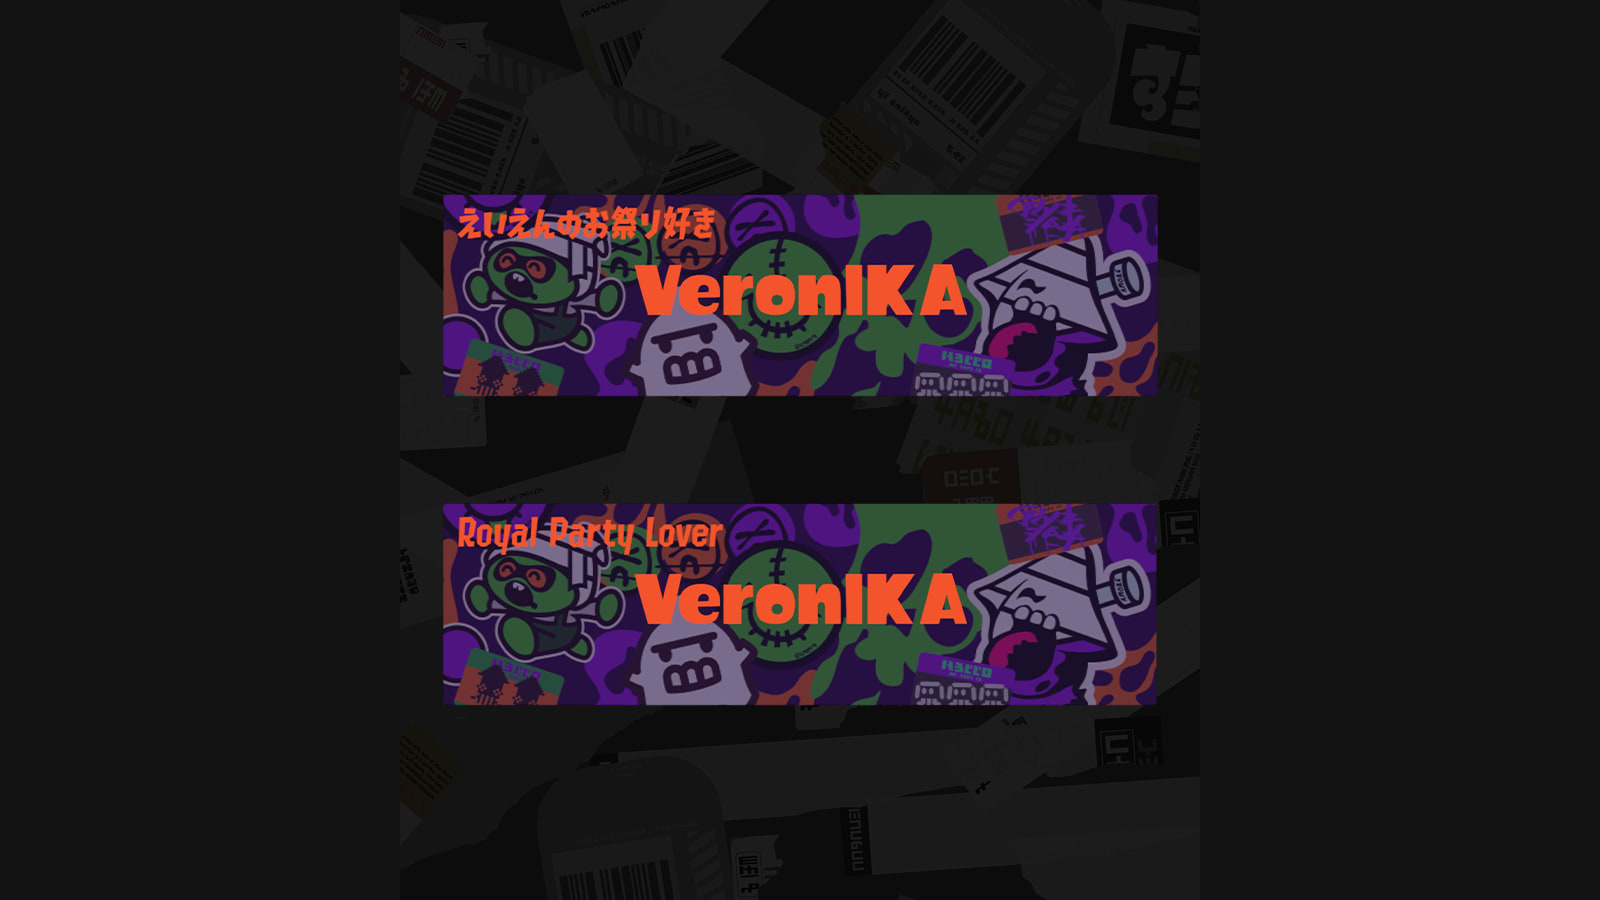 Splatoween-themed gear are available - Image 2